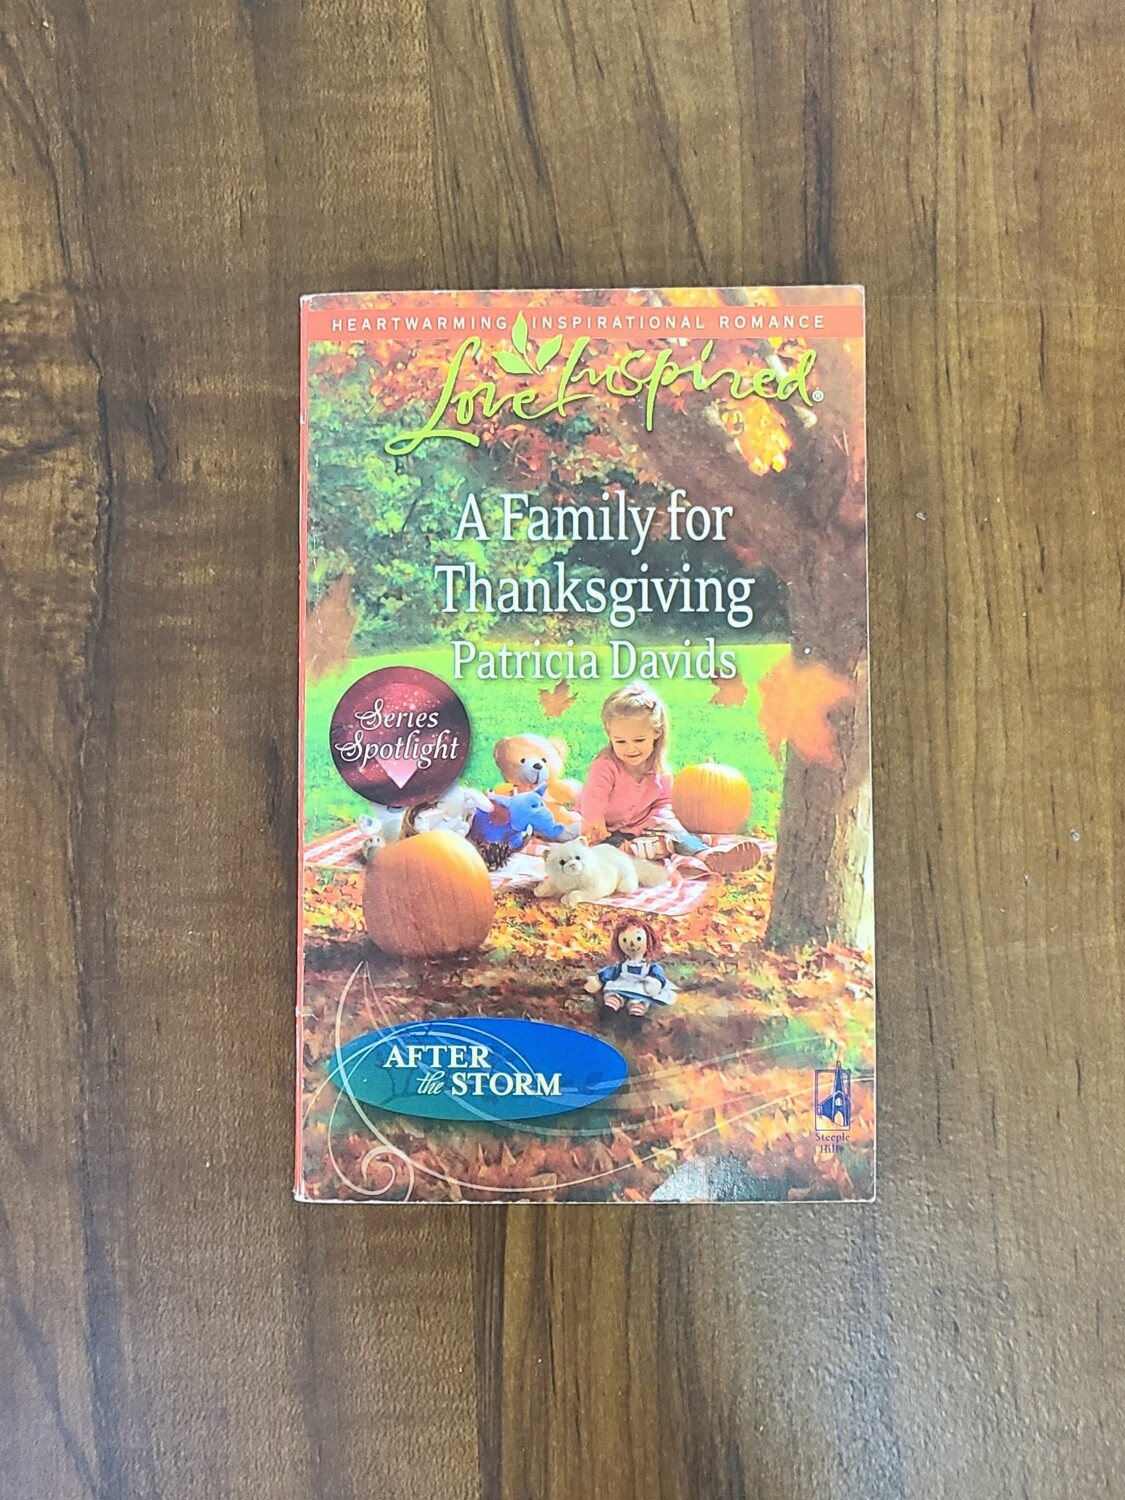 A Family for Thanksgiving by Patricia Davids